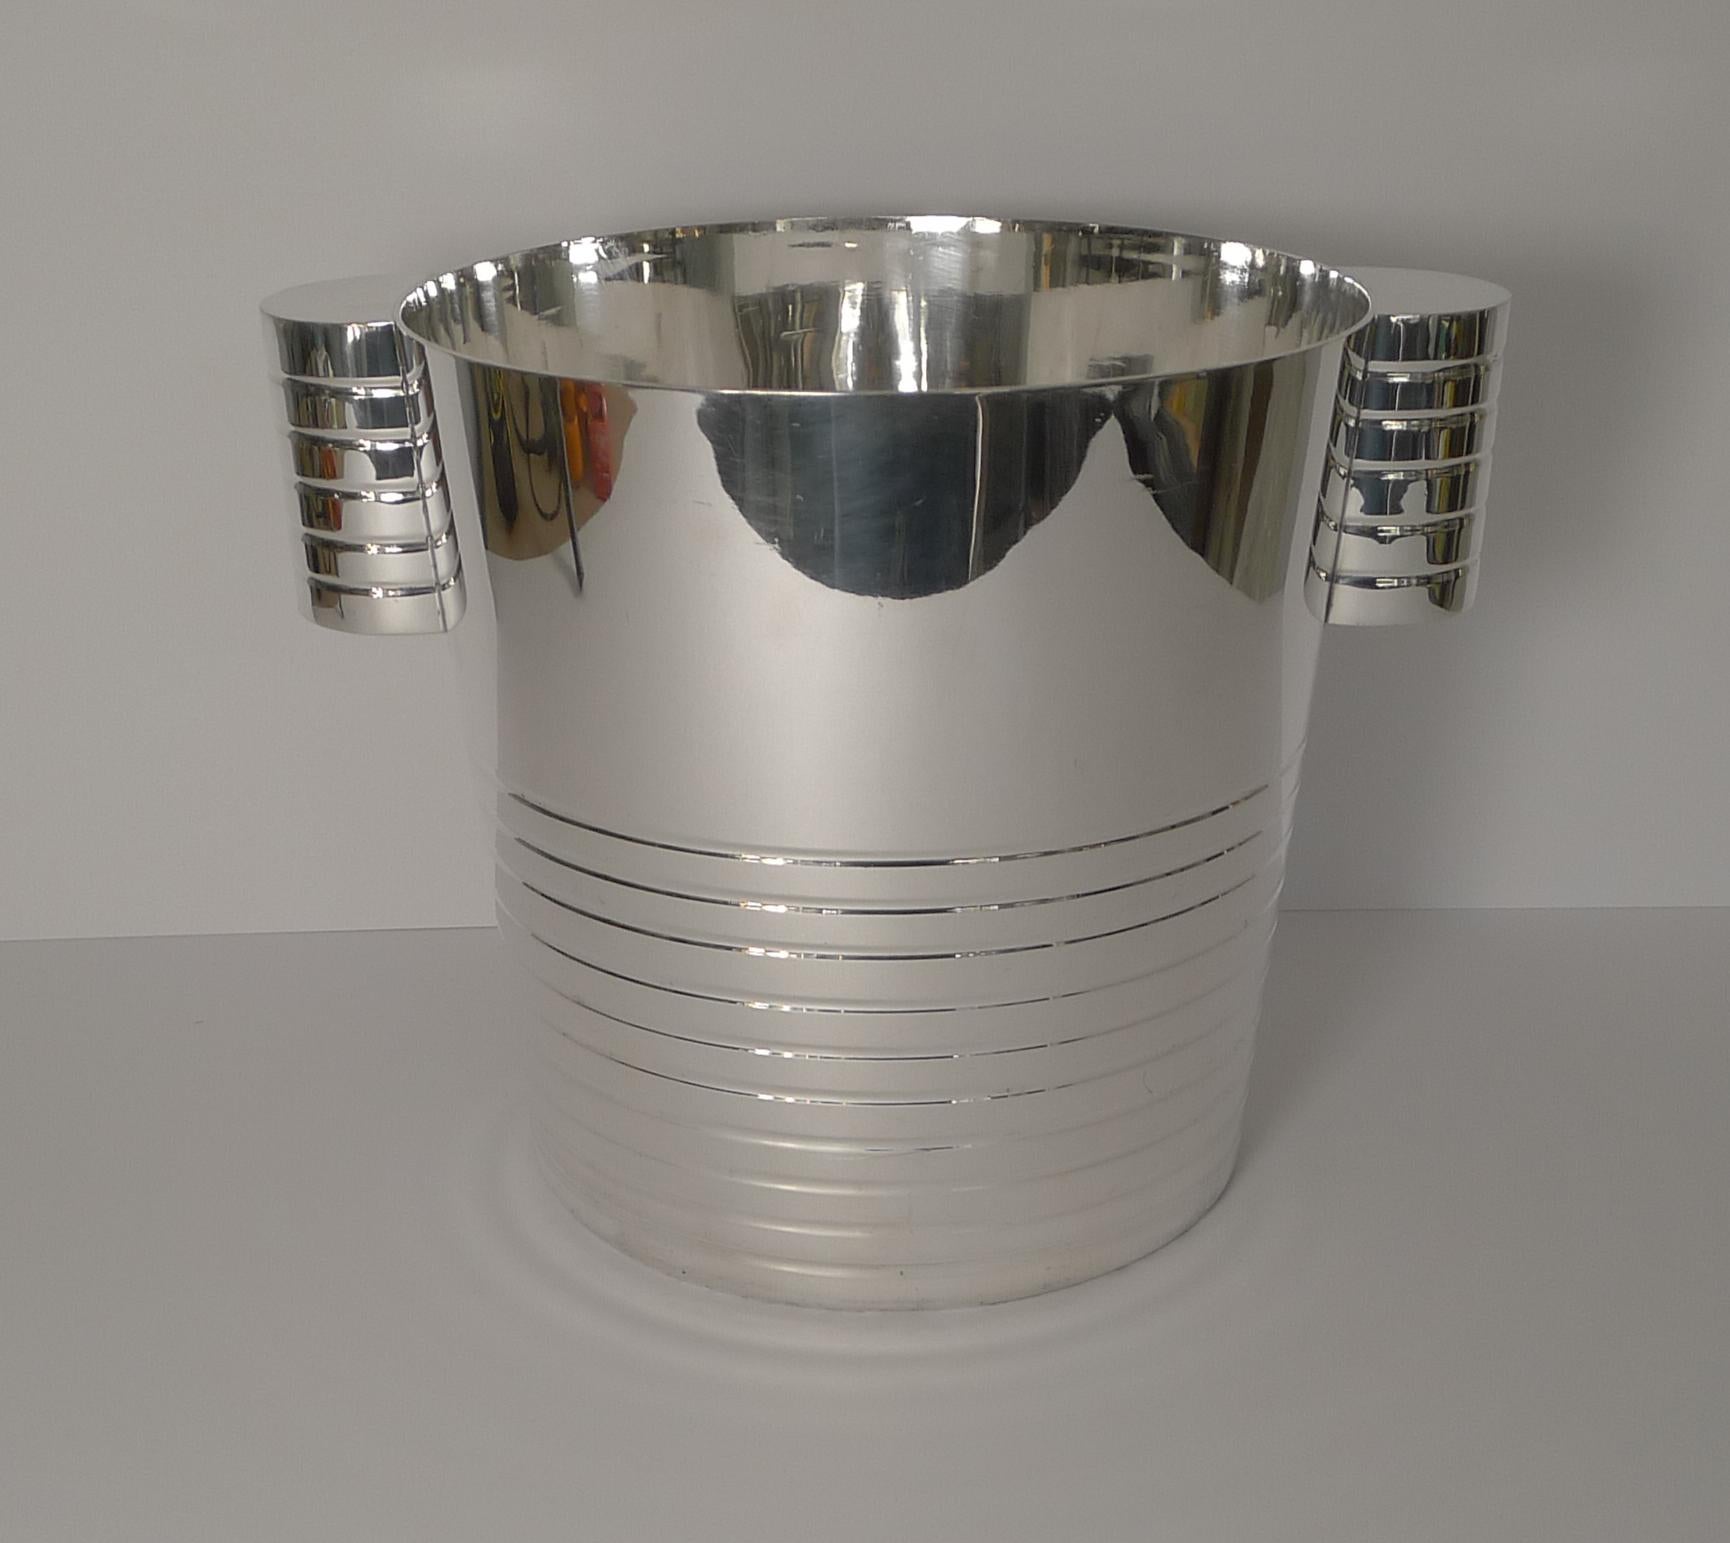 A very stylish vintage silver plated champagne bucket or wine cooler very much in the manner of Luc Lanel. Luc Lanel designed a range called Ondulations made by Maison Christofle in Paris for use on the S.S. Normandie, the luxury line of the